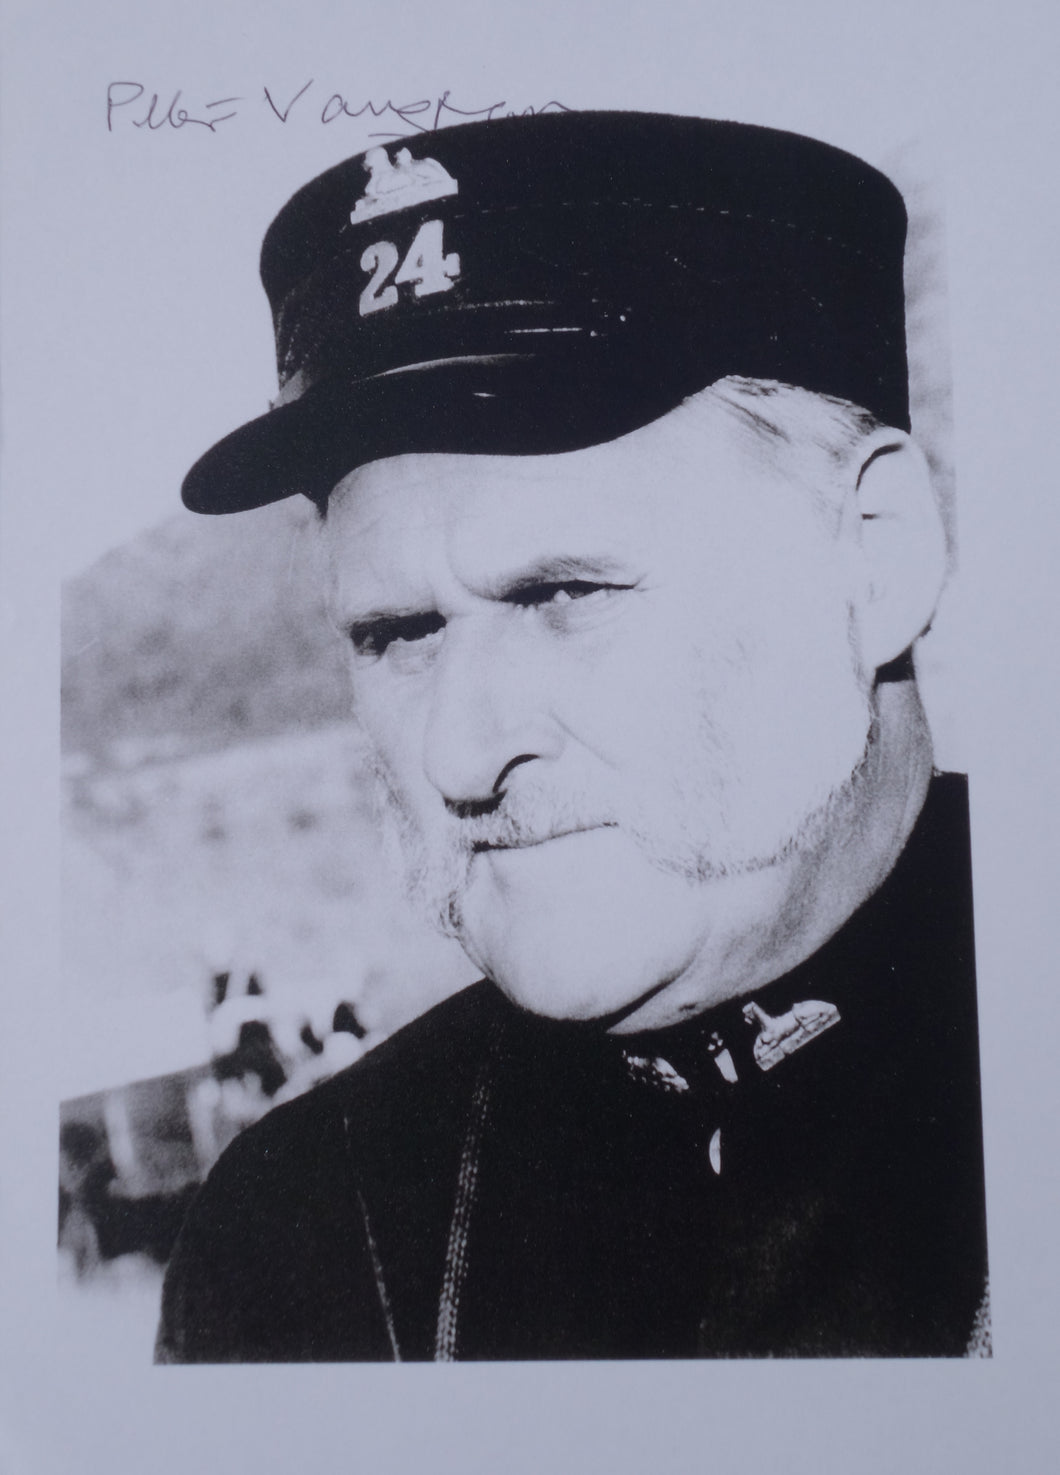 Celebrity Autograph - Peter Vaughan, who played ‘Quartermaster Bloomfield’ in Zulu Dawn